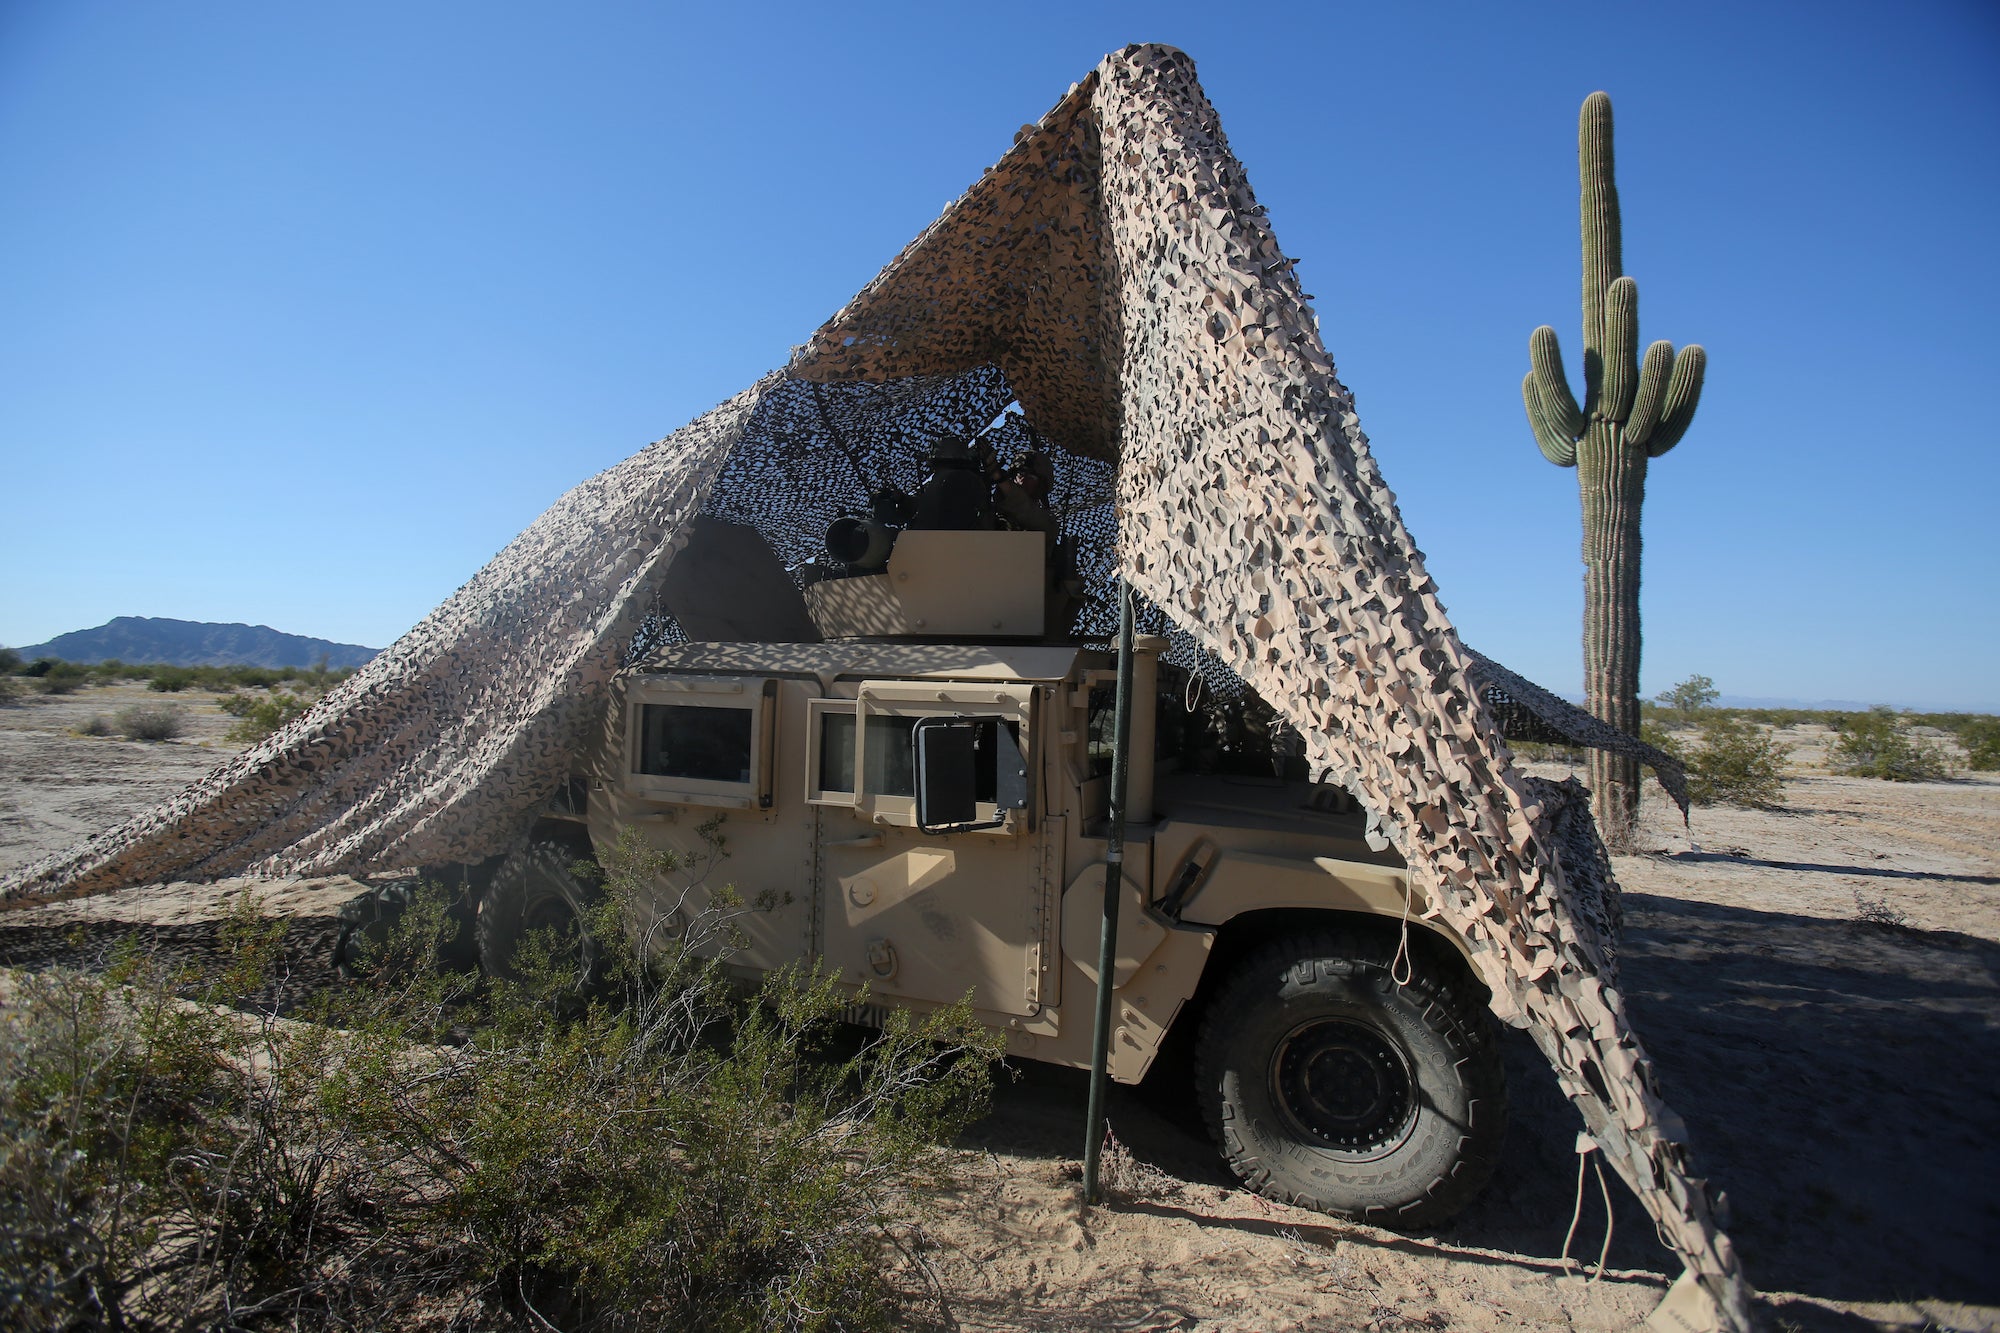 Camouflage in use during a training exercise in Arizona in 2013.